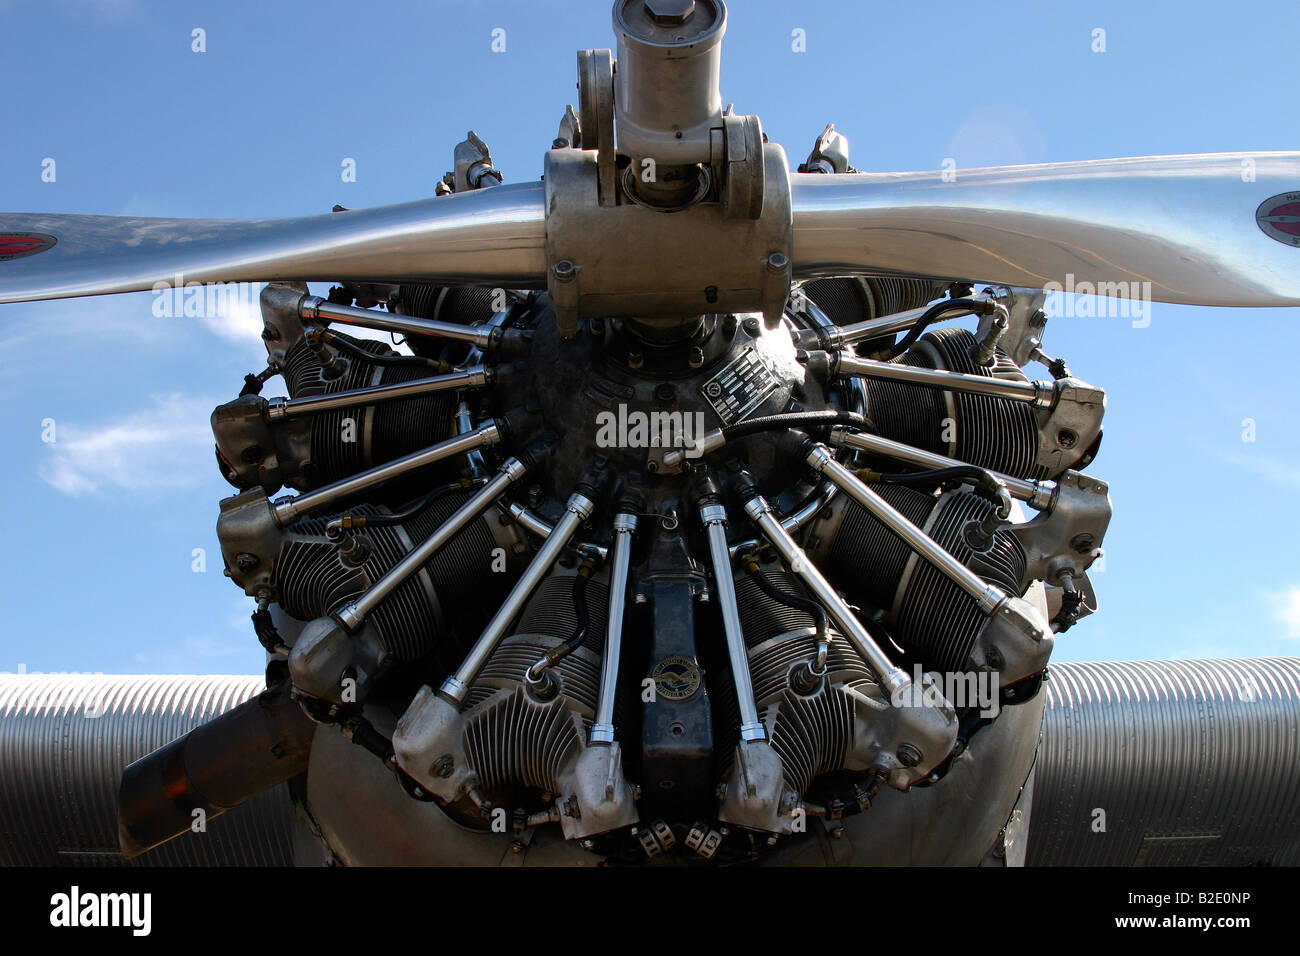 Classic Ford tri-engine rotary design aircraft Stock Photo